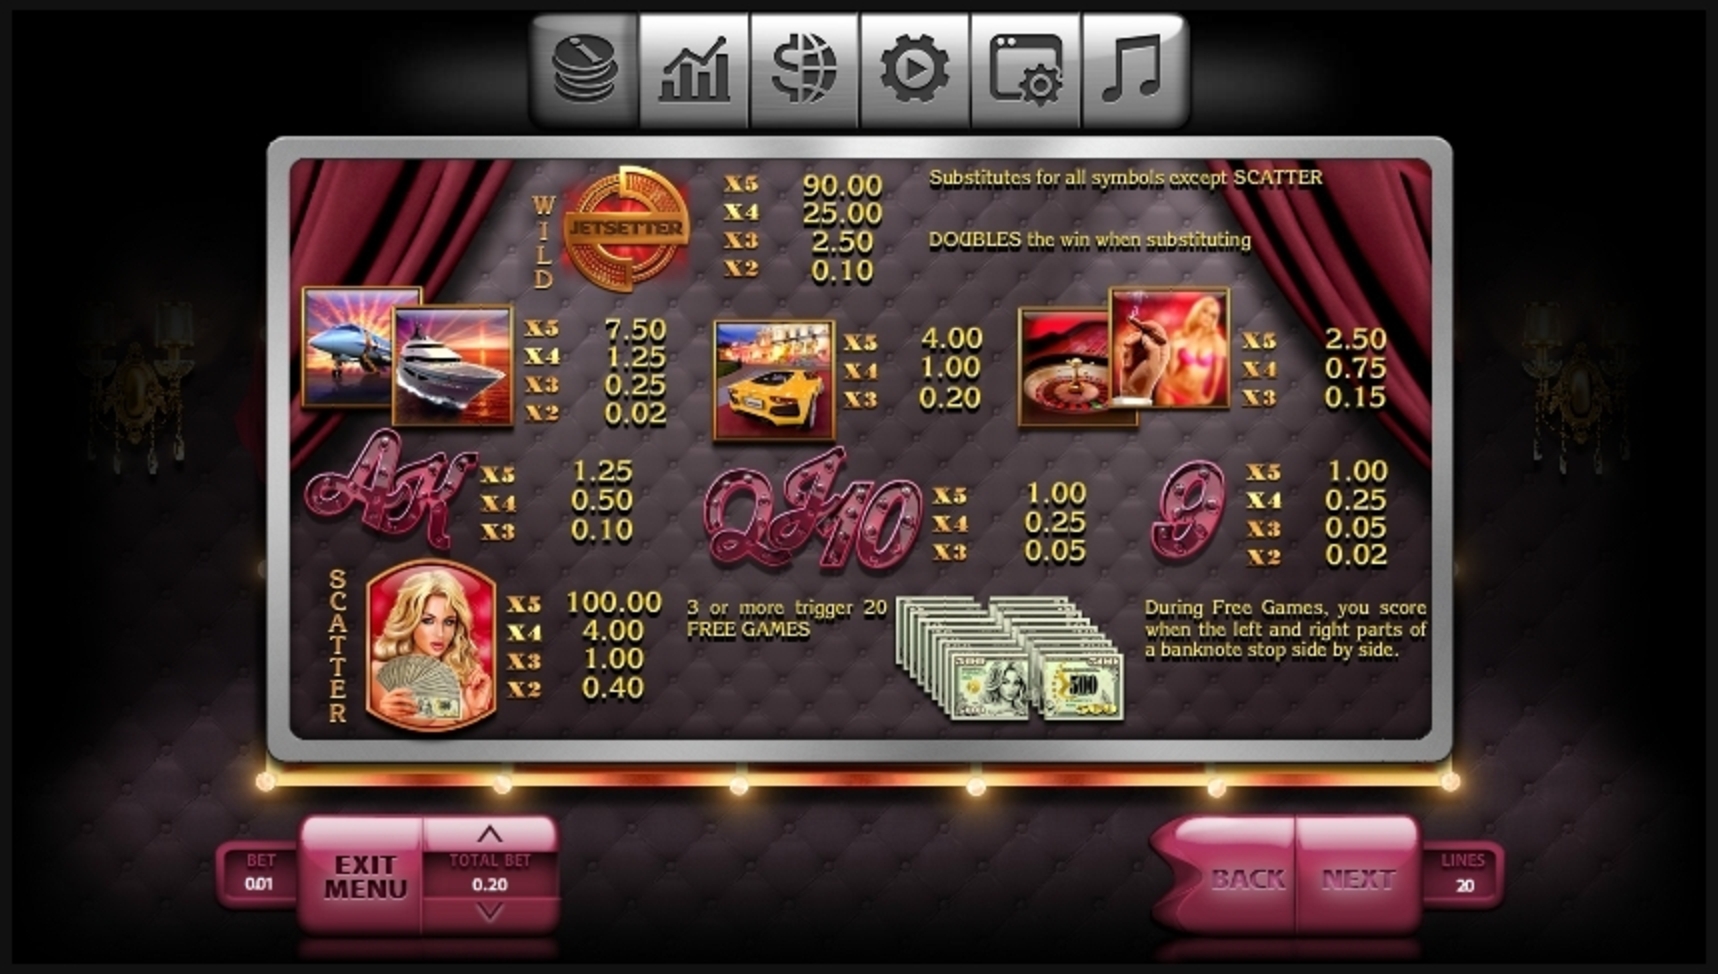 Info of Jetsetter Slot Game by Endorphina